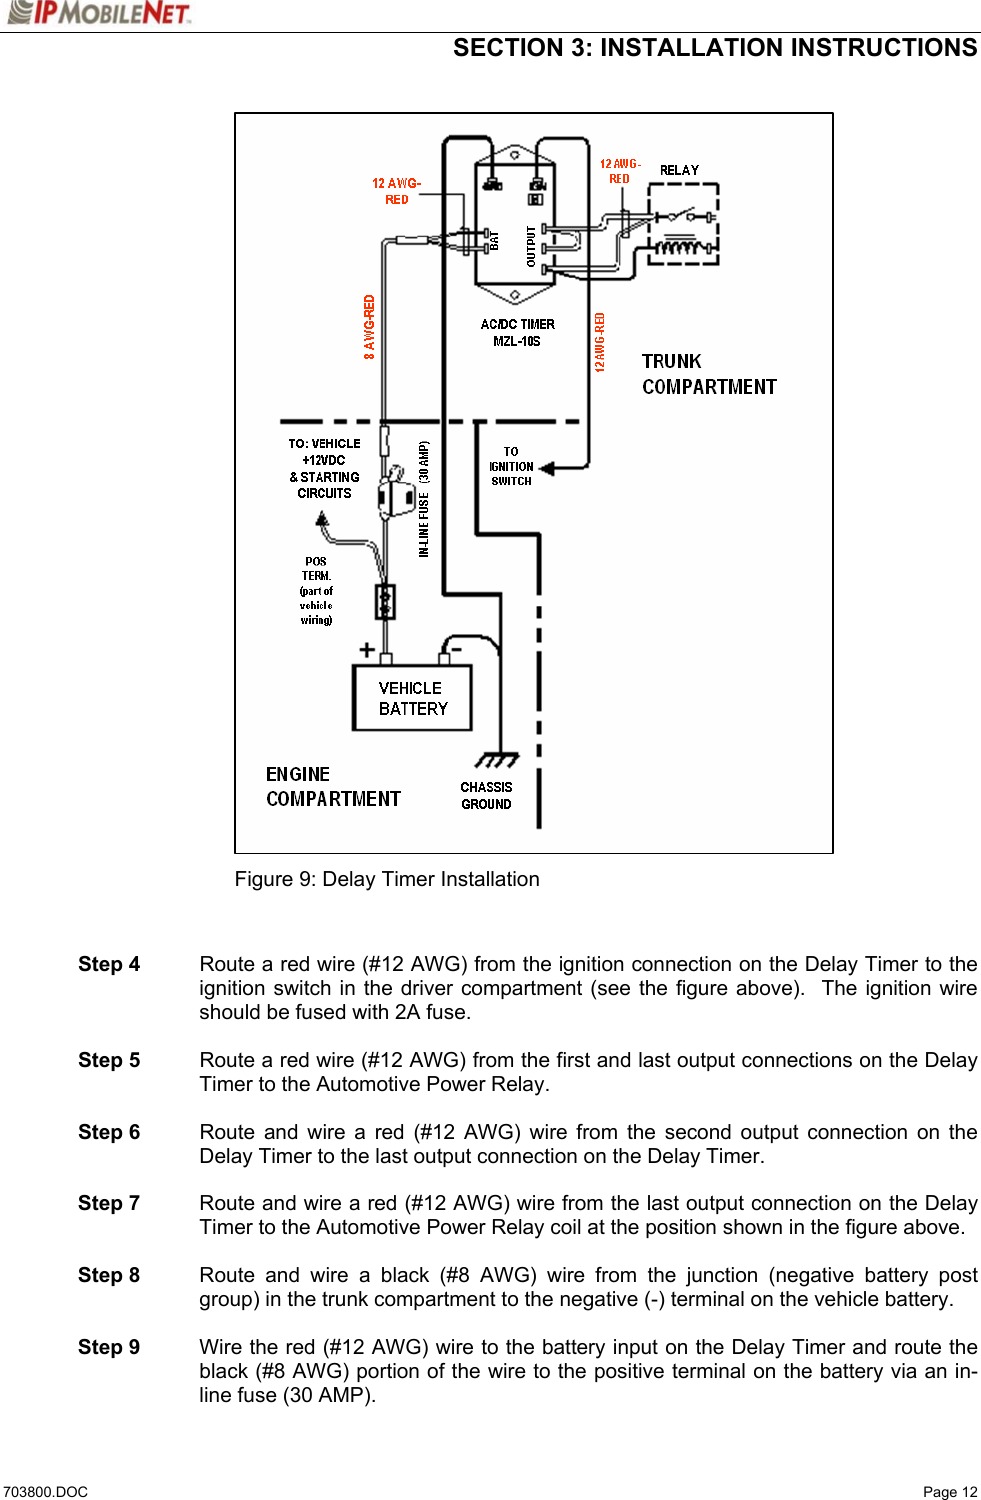  SECTION 3: INSTALLATION INSTRUCTIONS  703800.DOC   Page 12                               Figure 9: Delay Timer Installation    Step 4  Route a red wire (#12 AWG) from the ignition connection on the Delay Timer to the ignition switch in the driver compartment (see the figure above).  The ignition wire should be fused with 2A fuse.   Step 5  Route a red wire (#12 AWG) from the first and last output connections on the Delay Timer to the Automotive Power Relay.   Step 6  Route and wire a red (#12 AWG) wire from the second output connection on the Delay Timer to the last output connection on the Delay Timer.    Step 7  Route and wire a red (#12 AWG) wire from the last output connection on the Delay Timer to the Automotive Power Relay coil at the position shown in the figure above.   Step 8  Route and wire a black (#8 AWG) wire from the junction (negative battery post group) in the trunk compartment to the negative (-) terminal on the vehicle battery.   Step 9  Wire the red (#12 AWG) wire to the battery input on the Delay Timer and route the black (#8 AWG) portion of the wire to the positive terminal on the battery via an in-line fuse (30 AMP). 